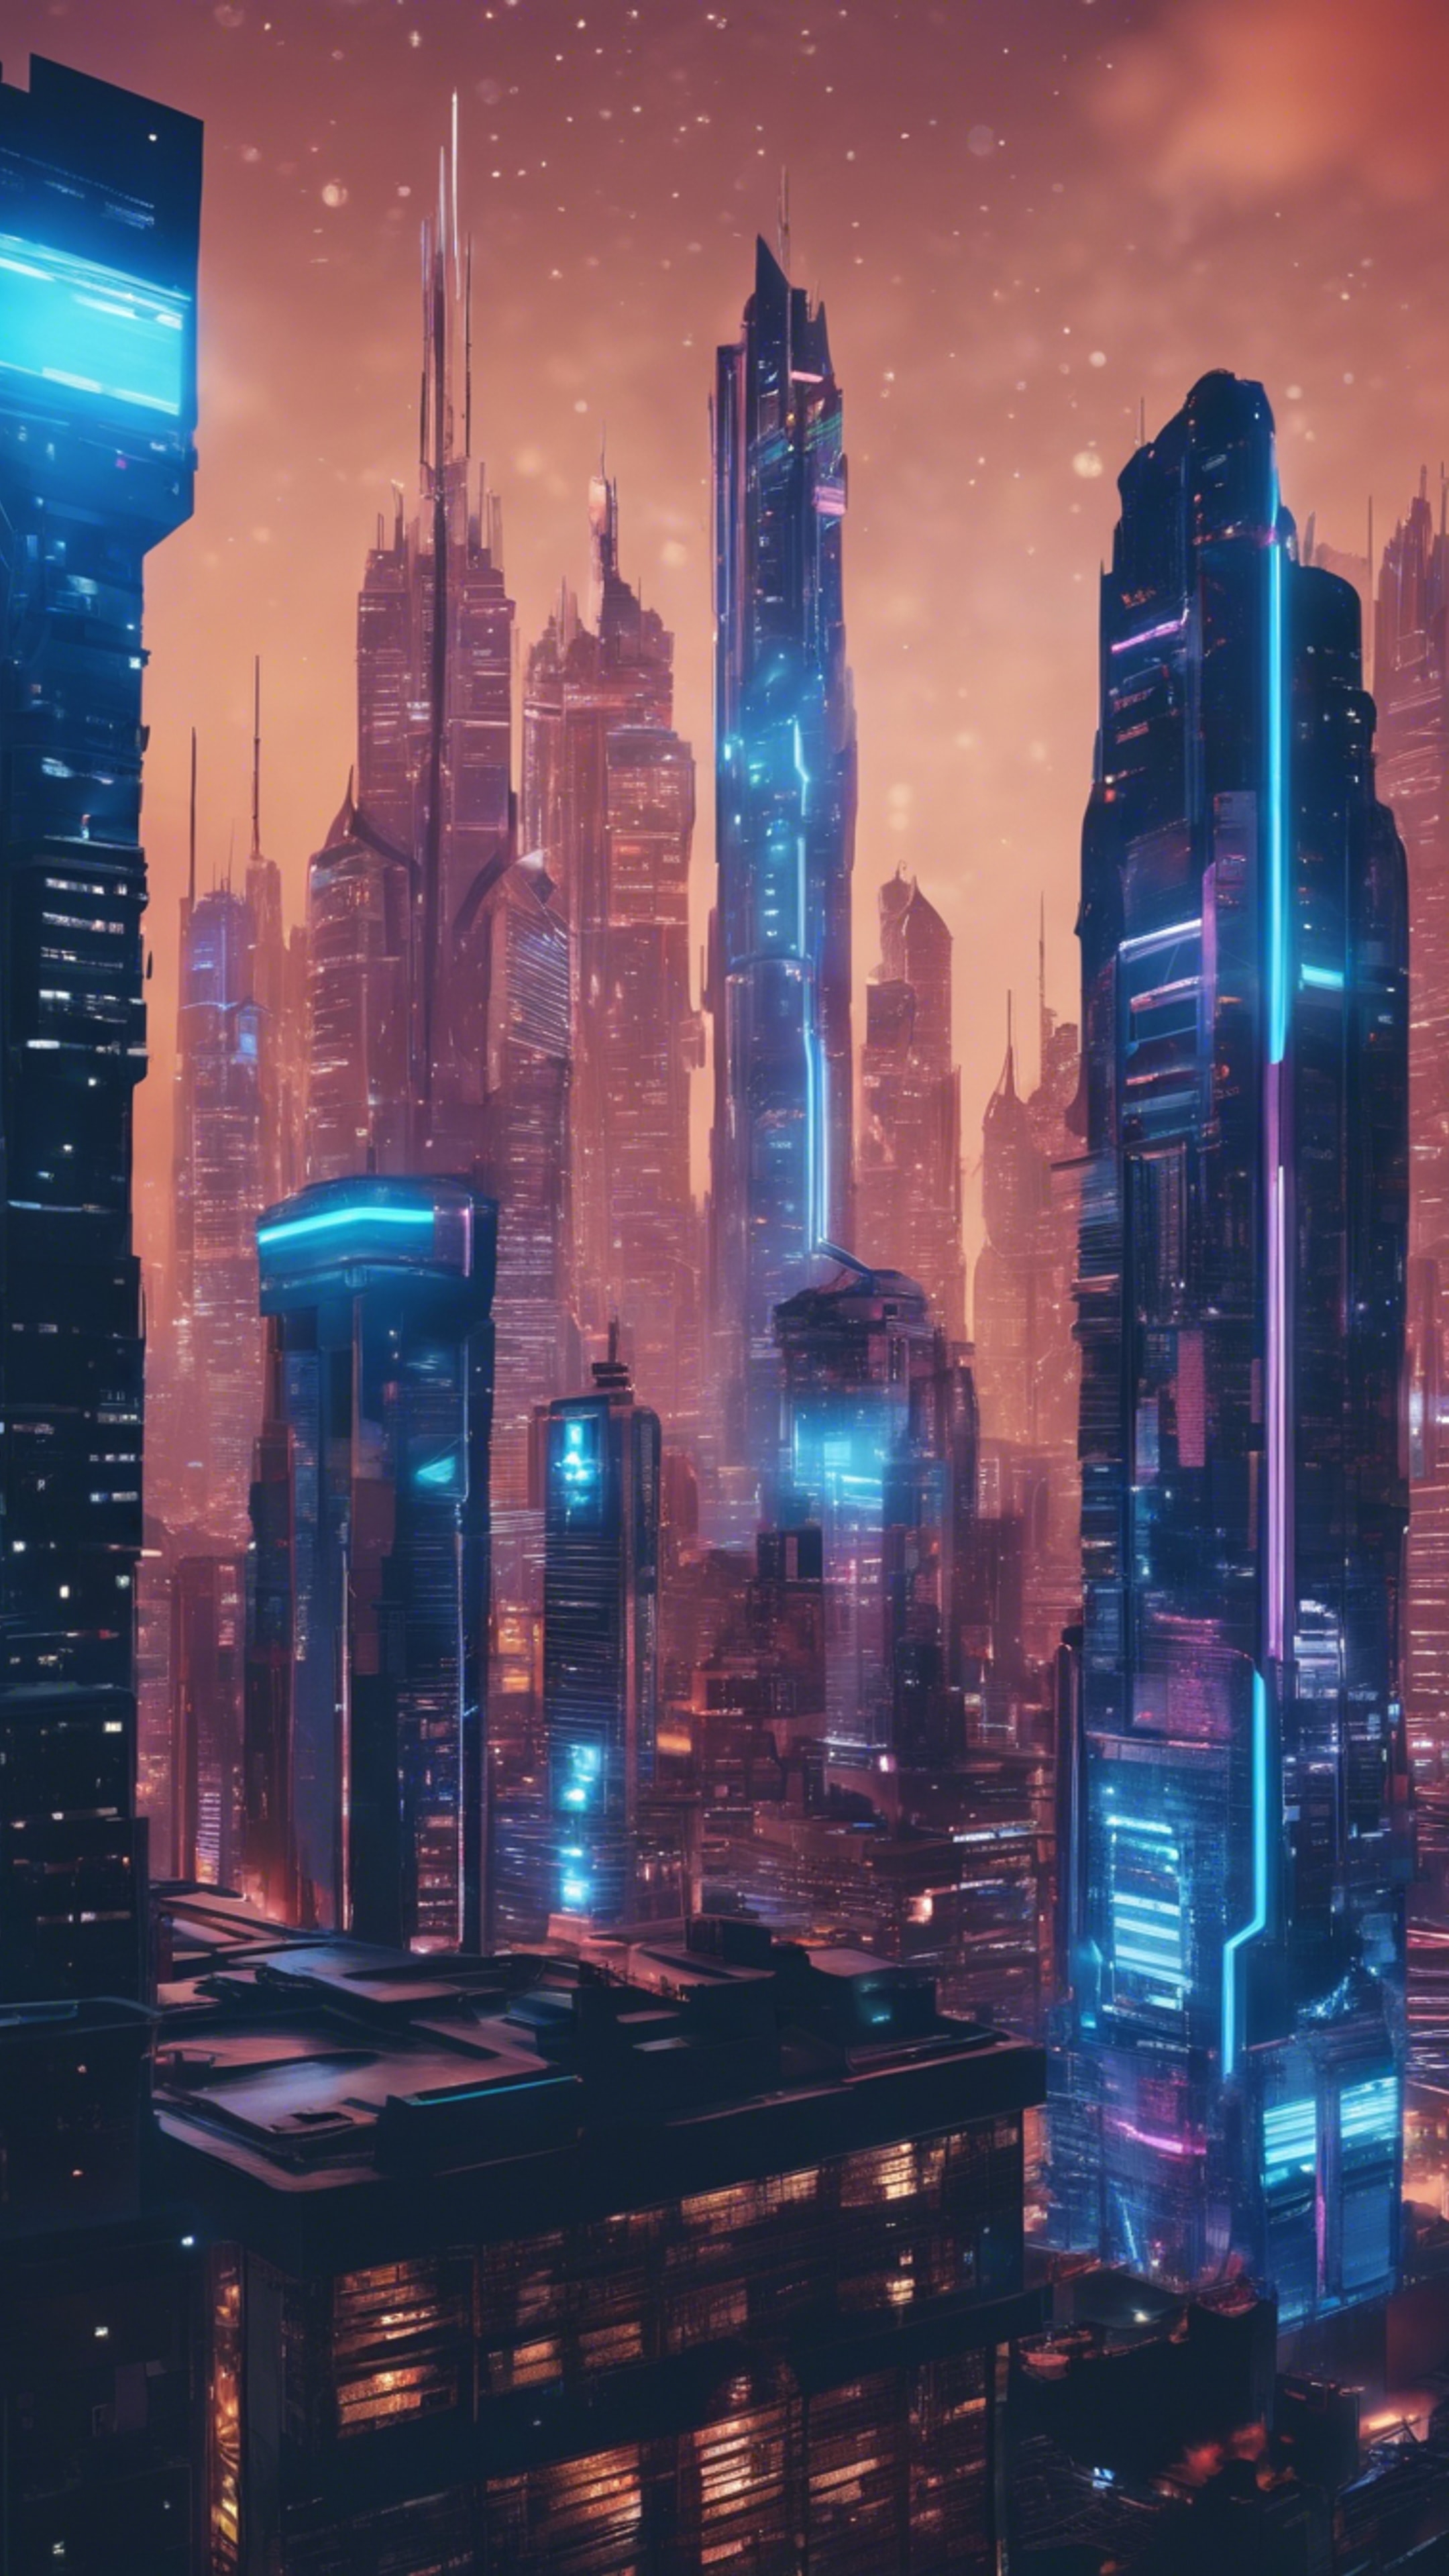 A futuristic city glowing with vibrant neon-blue lights and skyscrapers piercing the night sky. Wallpaper[2f3a3bdee3e14a4e9359]